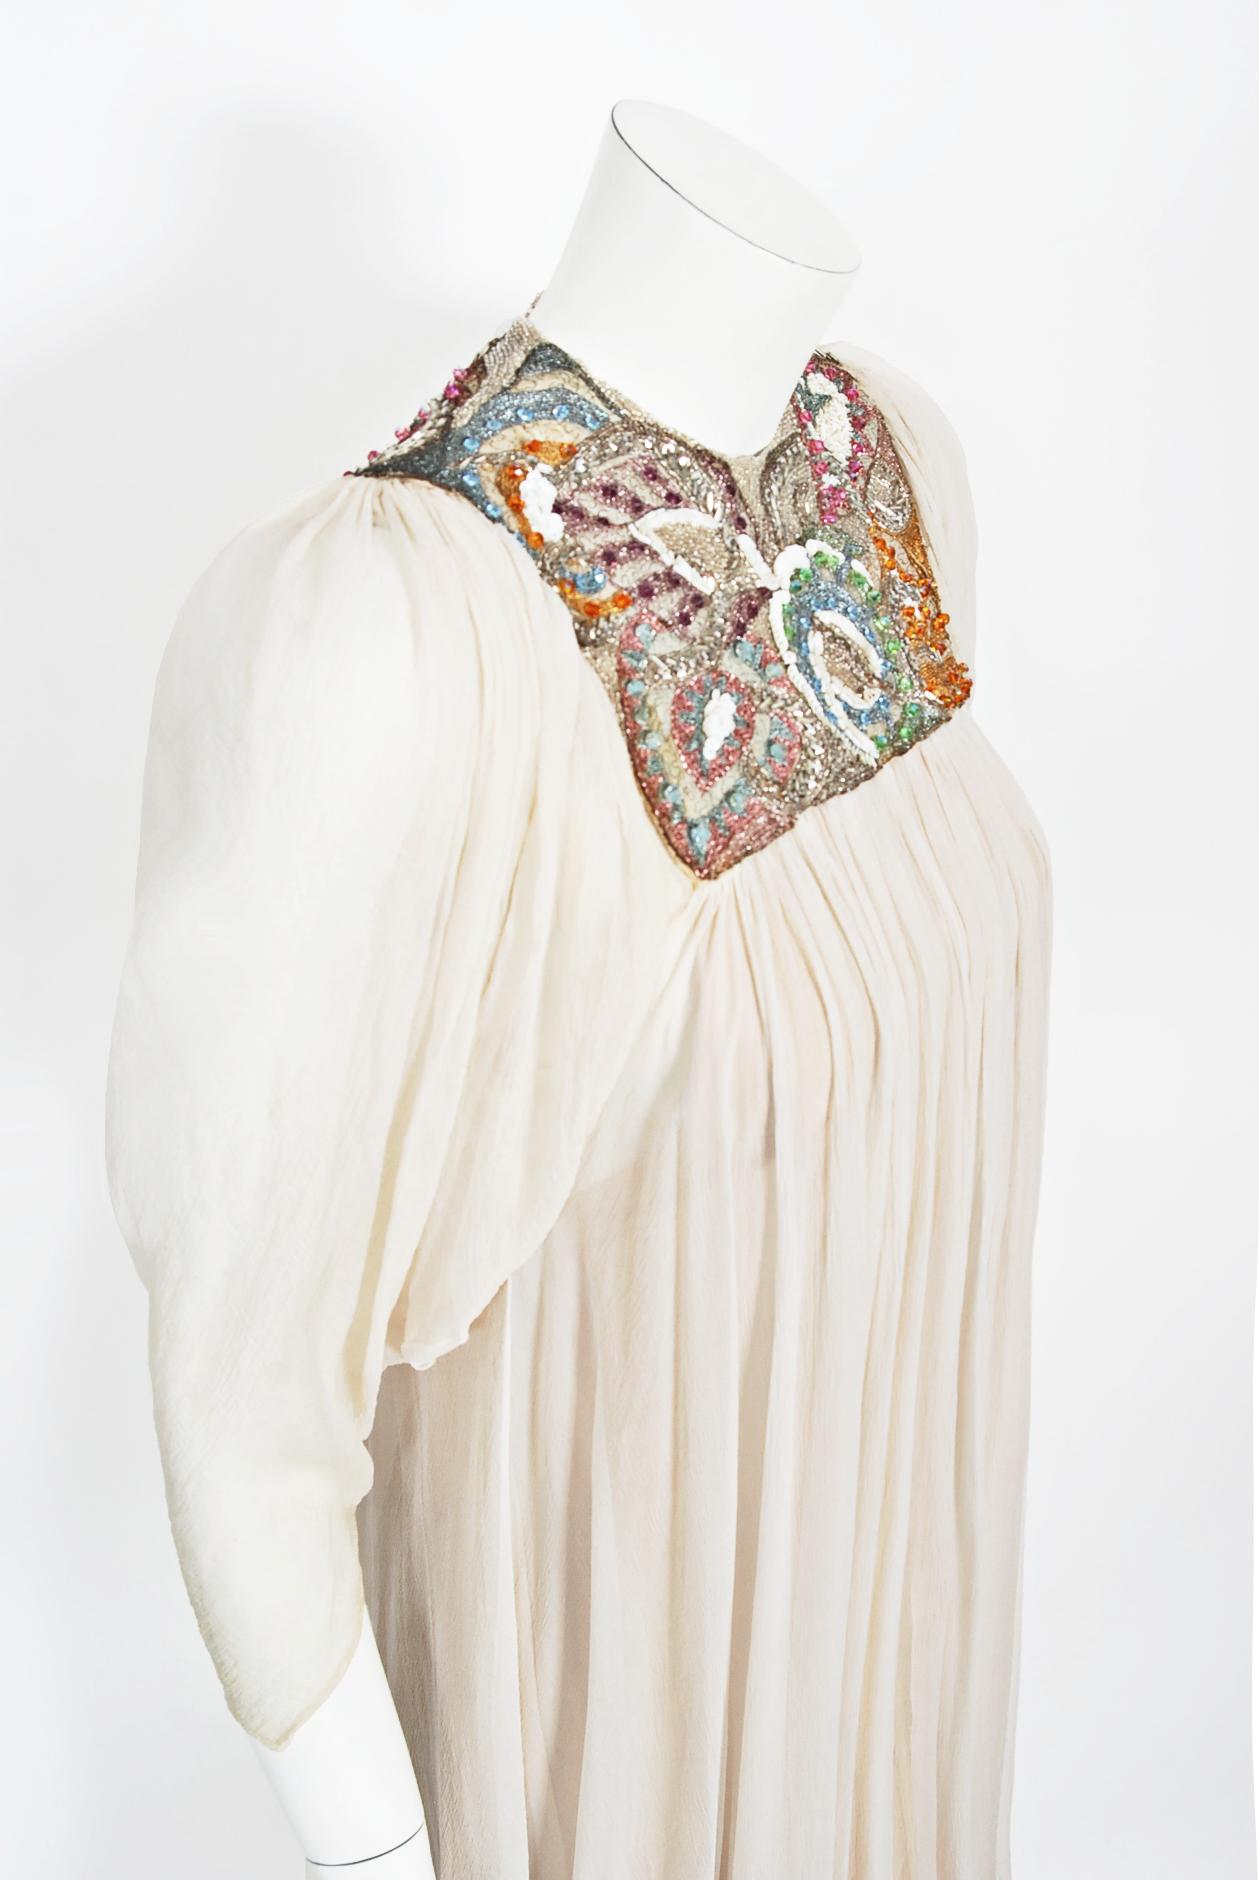 1970's Madame Grès Haute Couture Beaded Embroidered Ivory Sheer Silk Bridal Gown For Sale 2